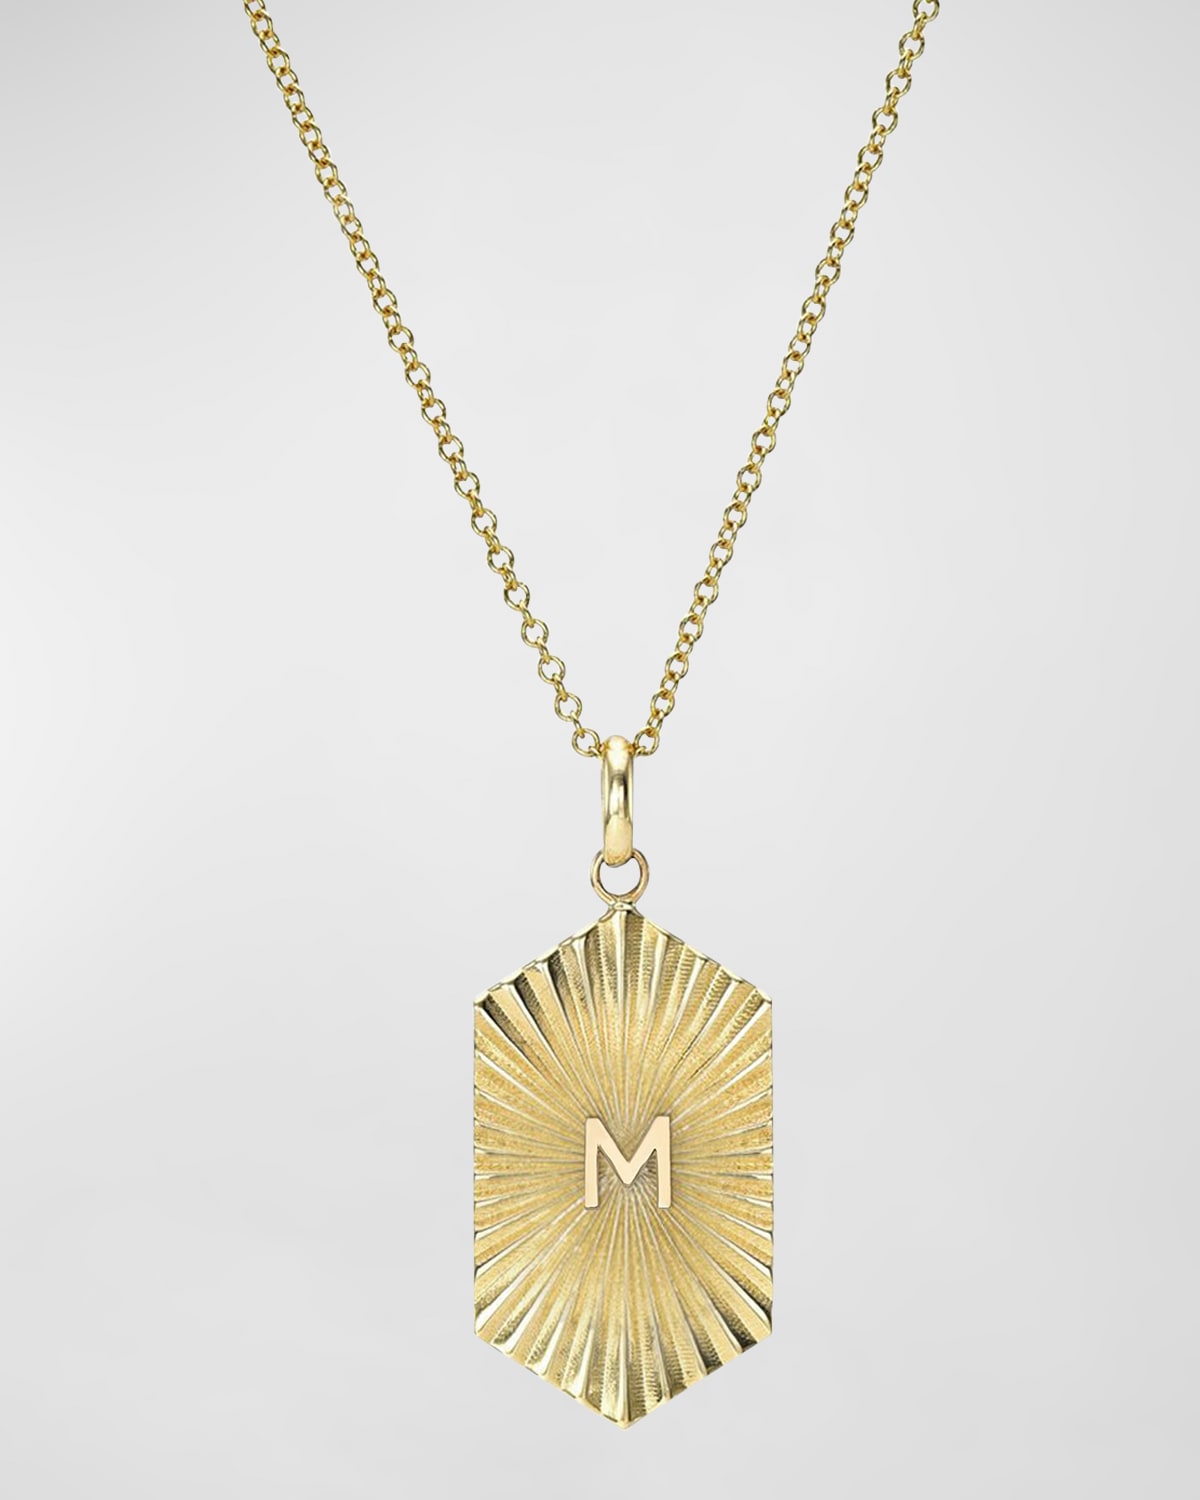 Zoe Lev Jewelry 14k Gold Pleated Shield With Initial Necklace In M